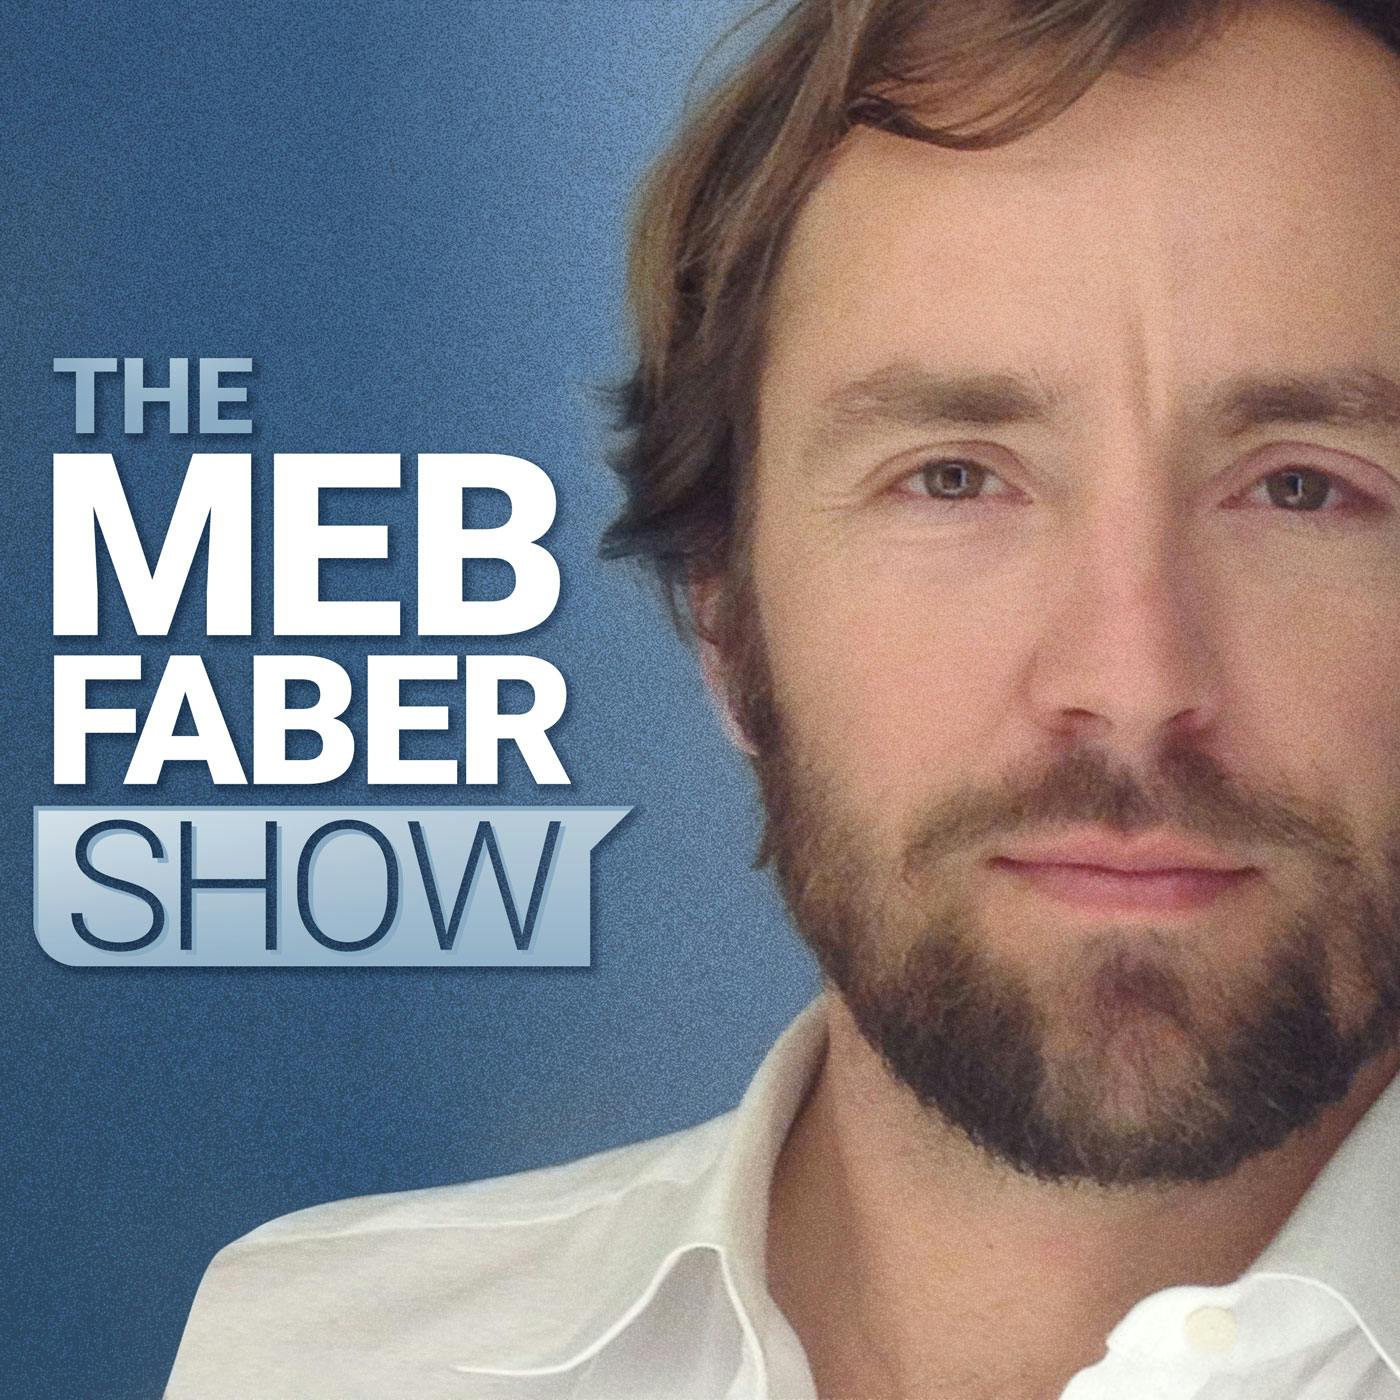 The Meb Faber Show:Meb Faber